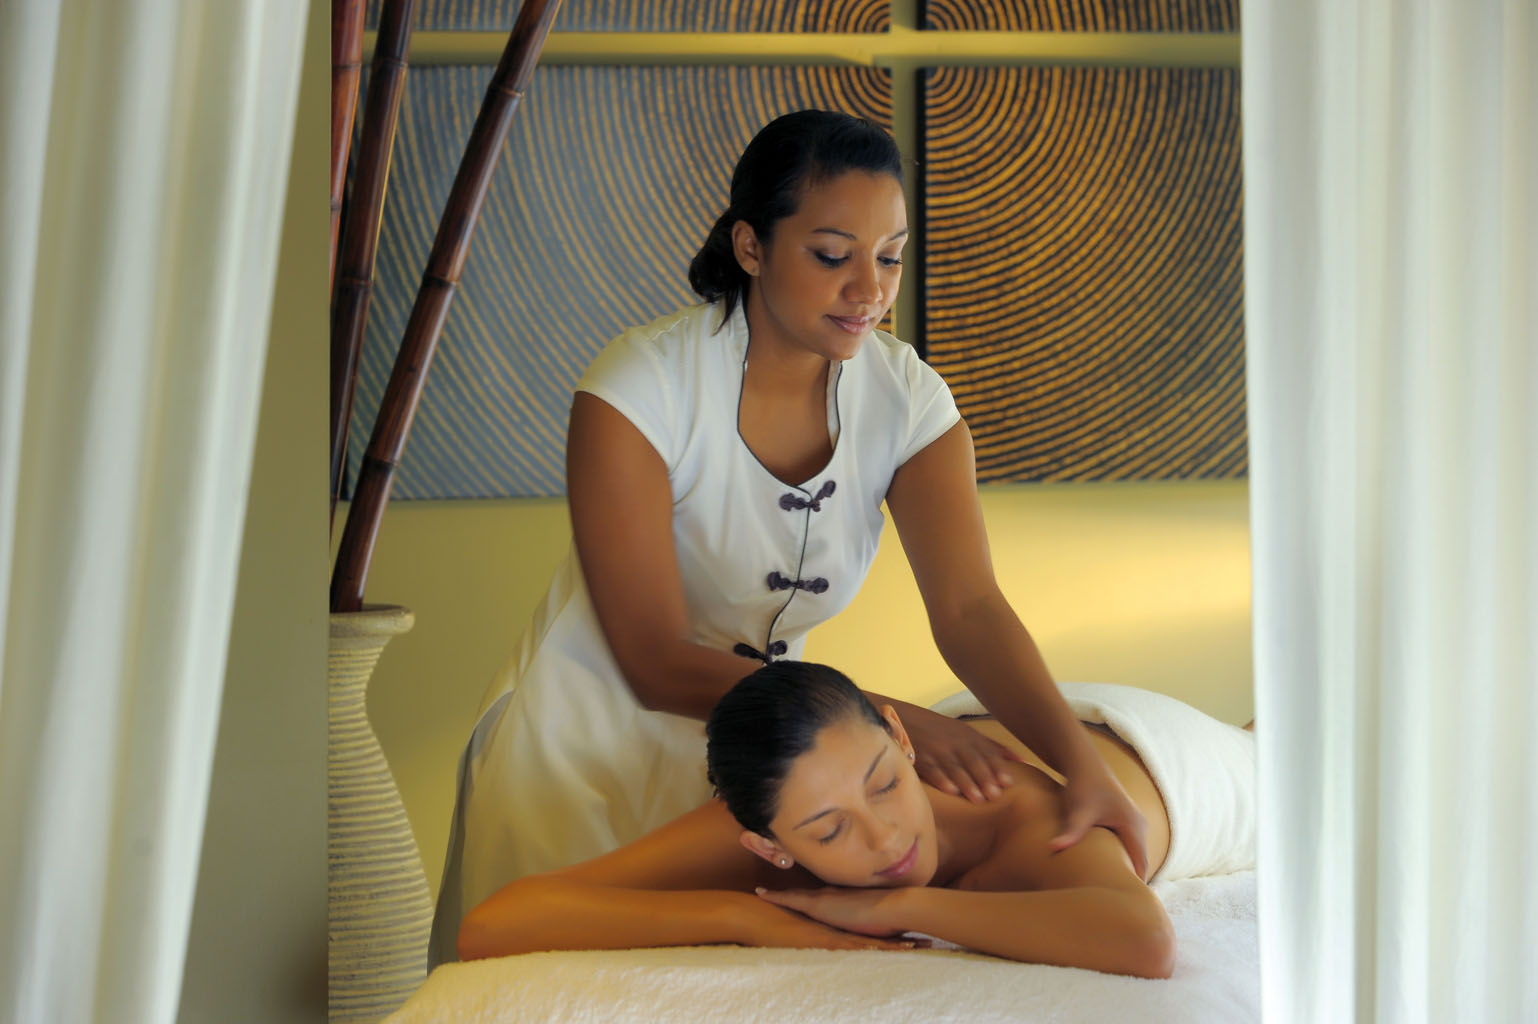 Art of Touch - Spa by Clarins - Royal Palm Mauritius - Beachcomber